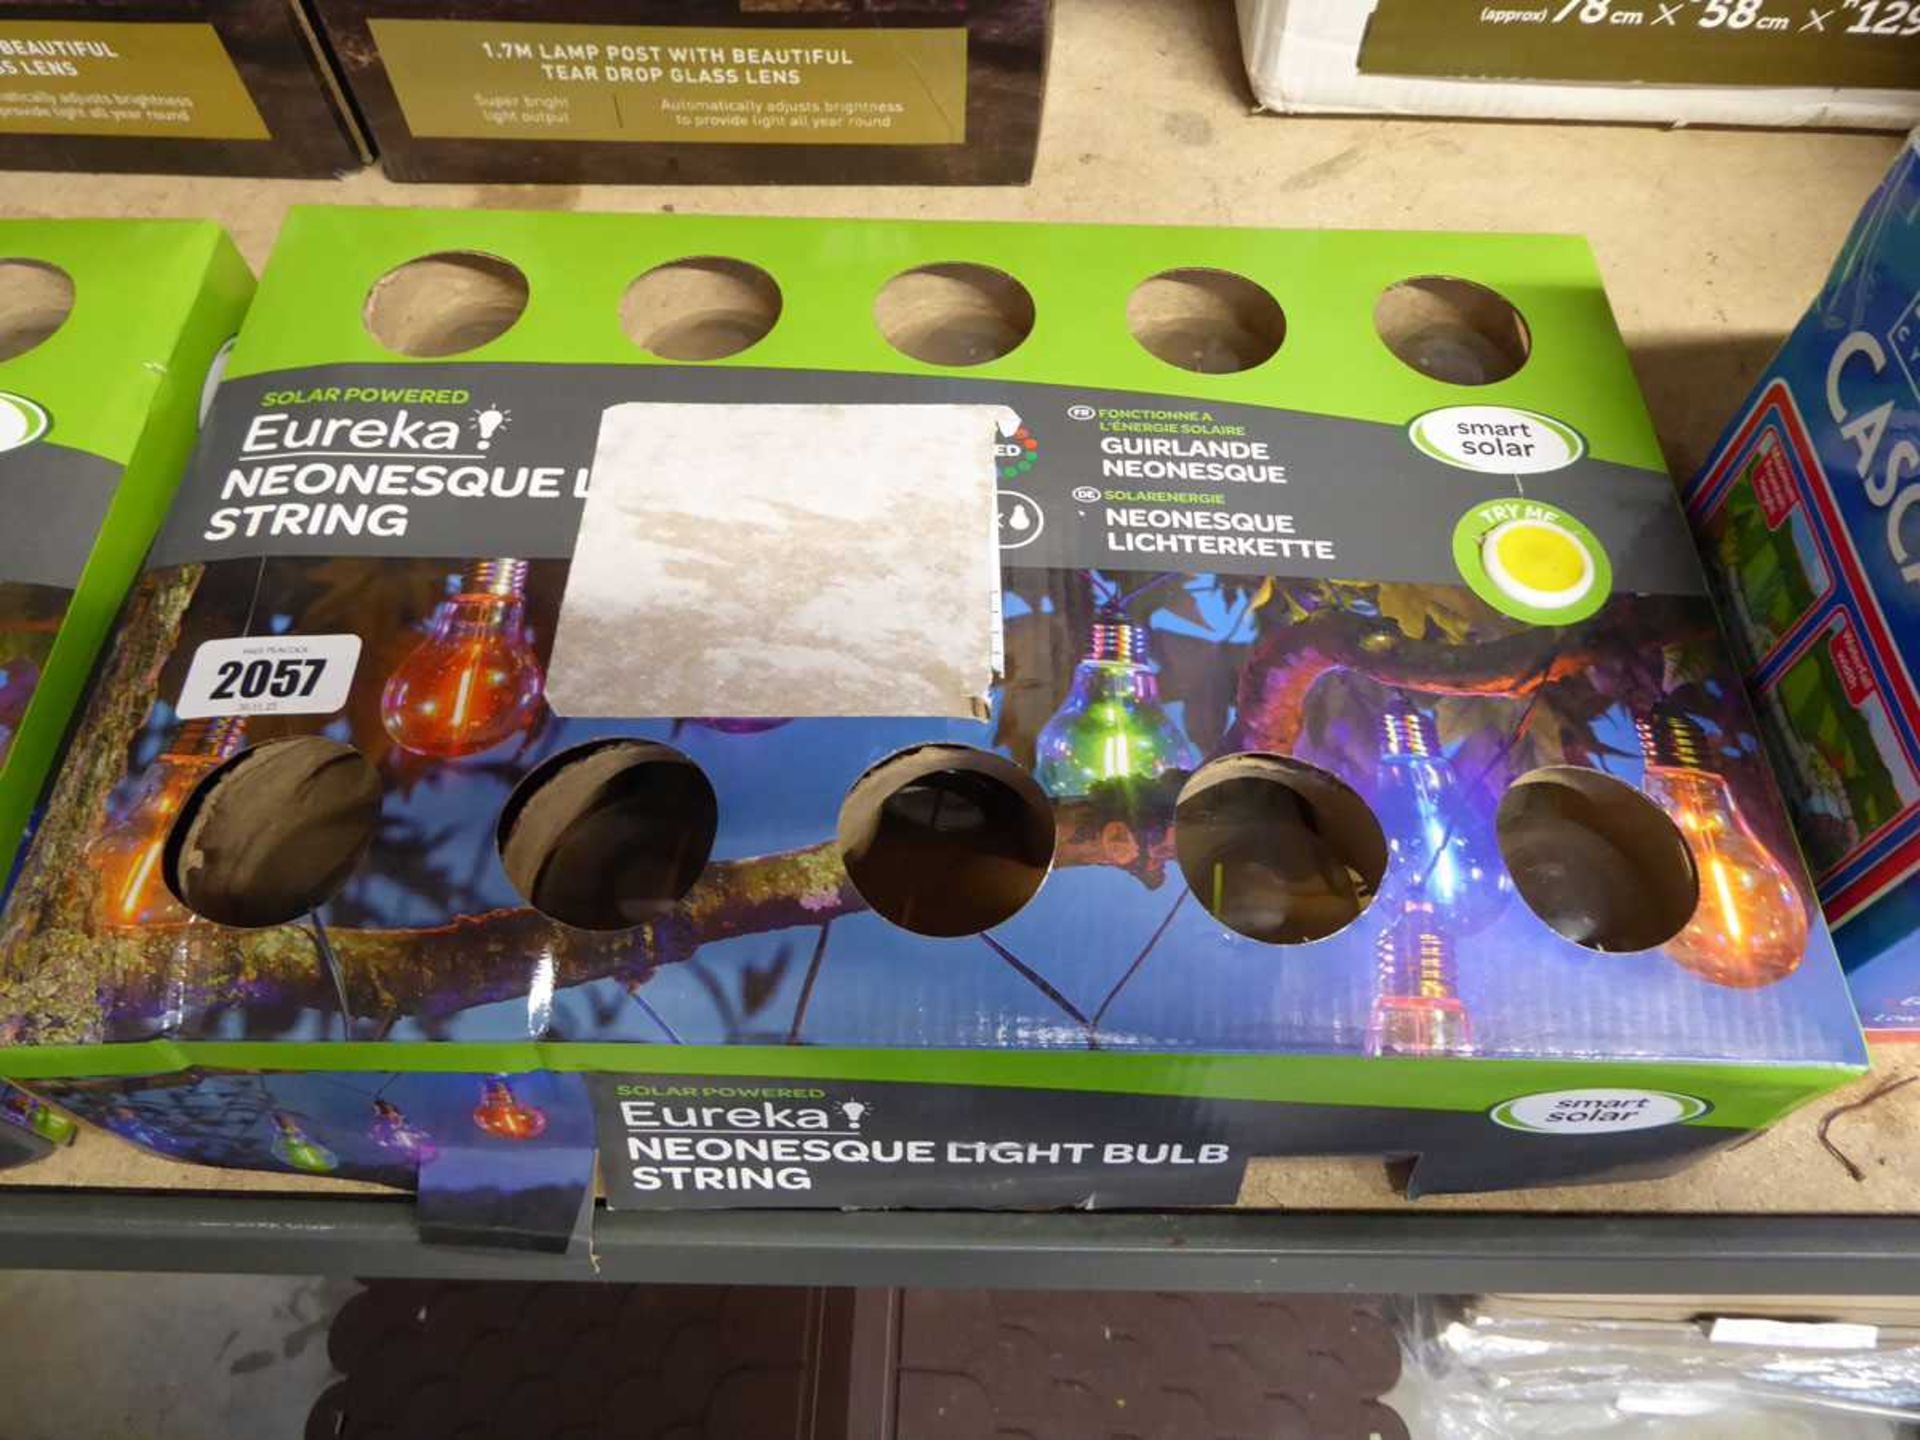 3 boxed solar powered outdoor string lights - Image 2 of 2